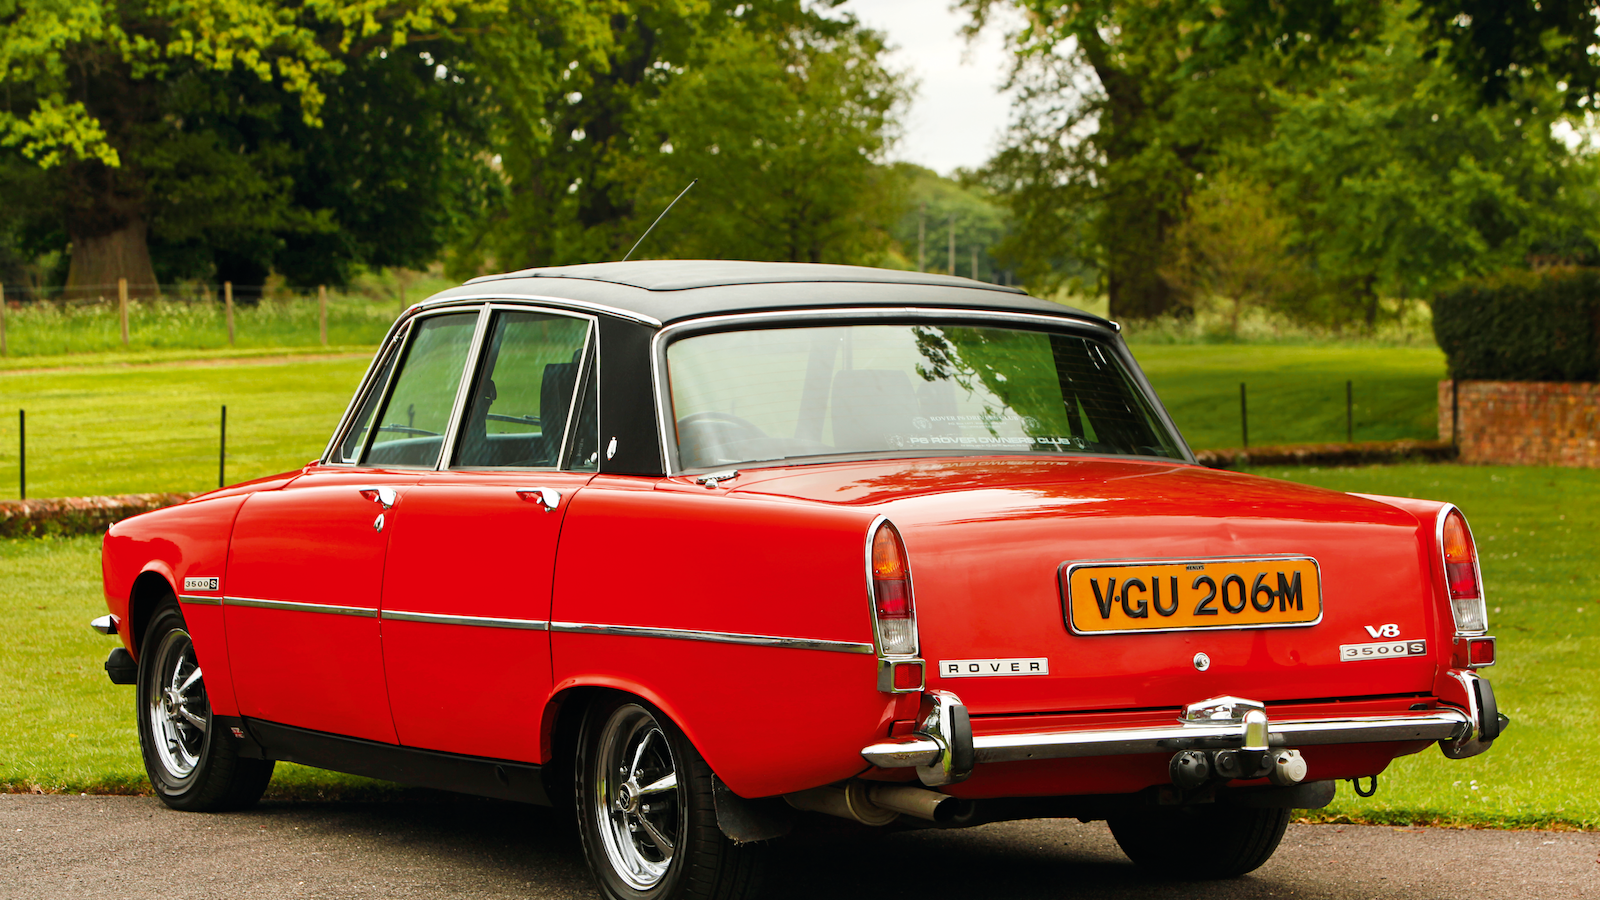 60 years of the Rover V8